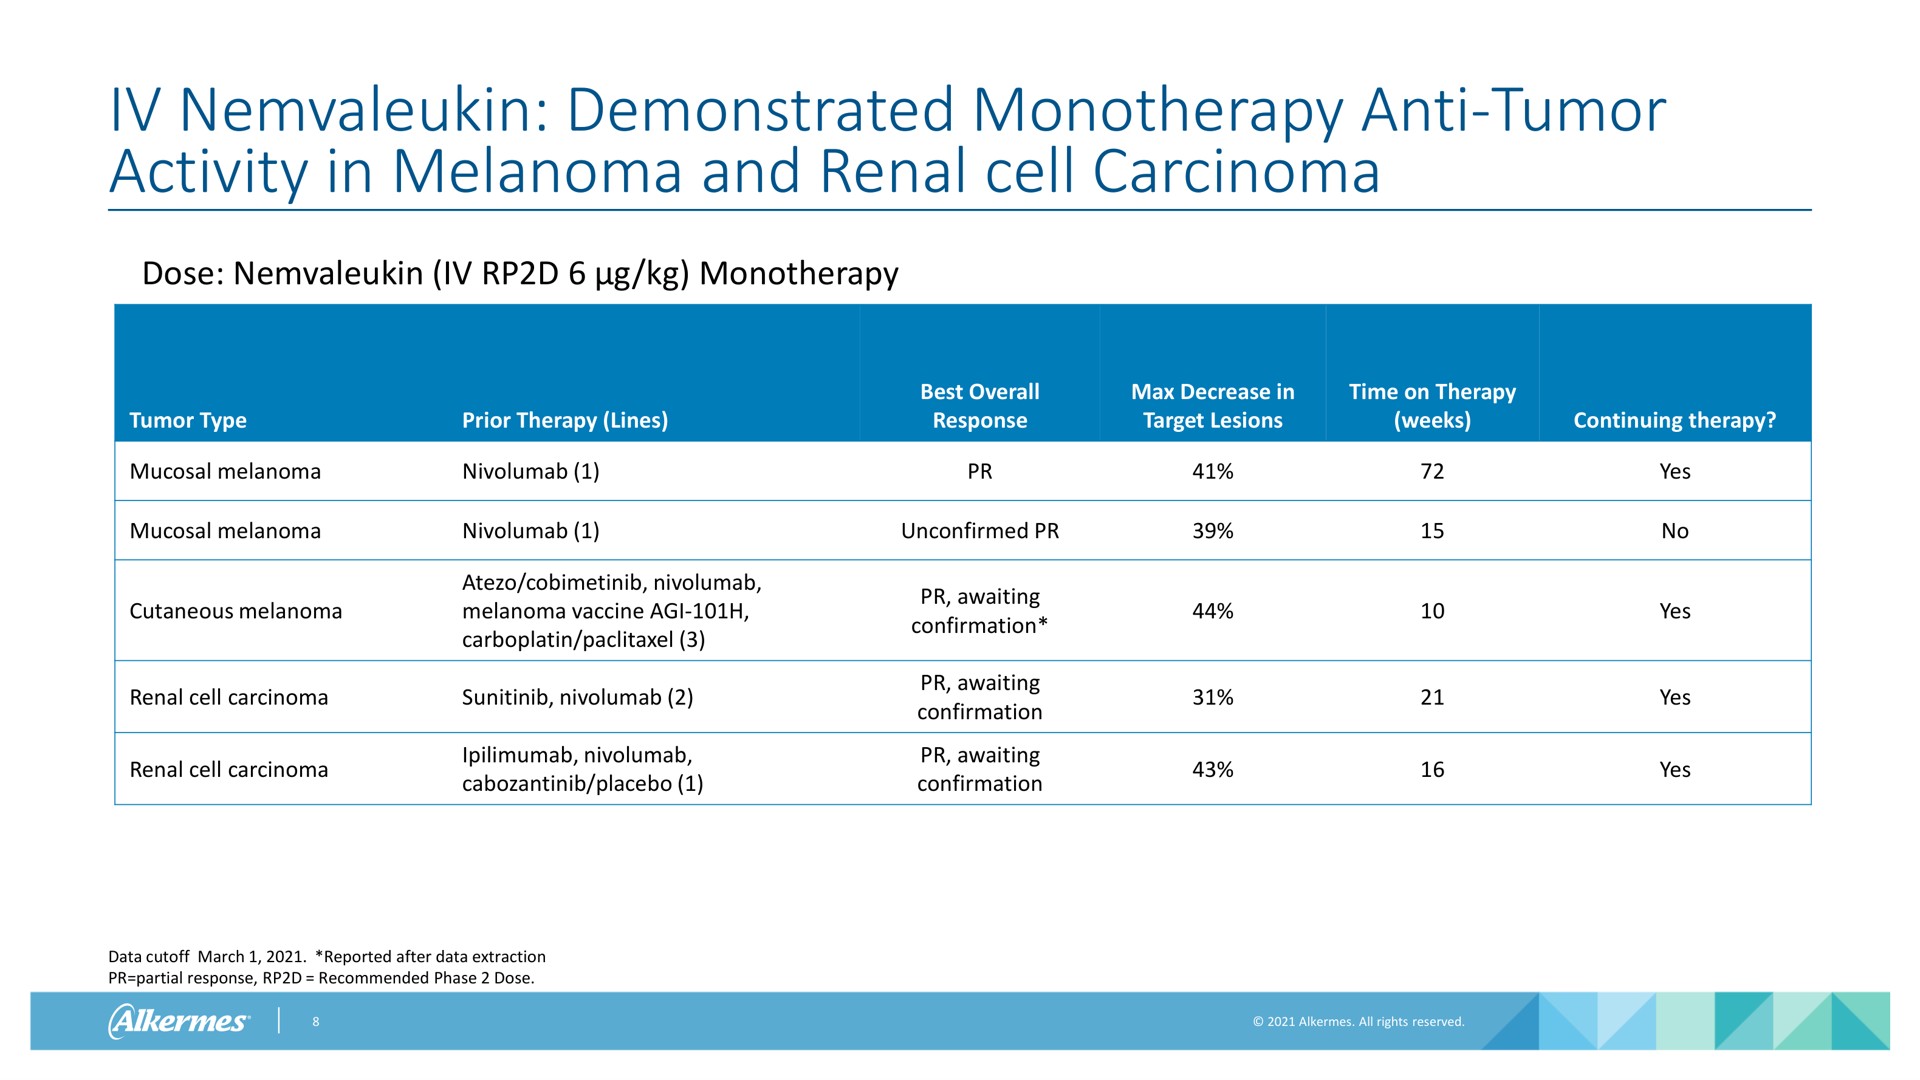 demonstrated anti tumor activity in melanoma and renal cell carcinoma dose tumor type prior therapy lines best overall response decrease in target lesions time on therapy weeks continuing therapy mucosal melanoma mucosal melanoma unconfirmed cutaneous melanoma melanoma vaccine renal cell carcinoma renal cell carcinoma placebo awaiting confirmation awaiting confirmation awaiting confirmation yes no yes yes yes data cutoff march reported after data extraction partial response recommended phase dose | Alkermes